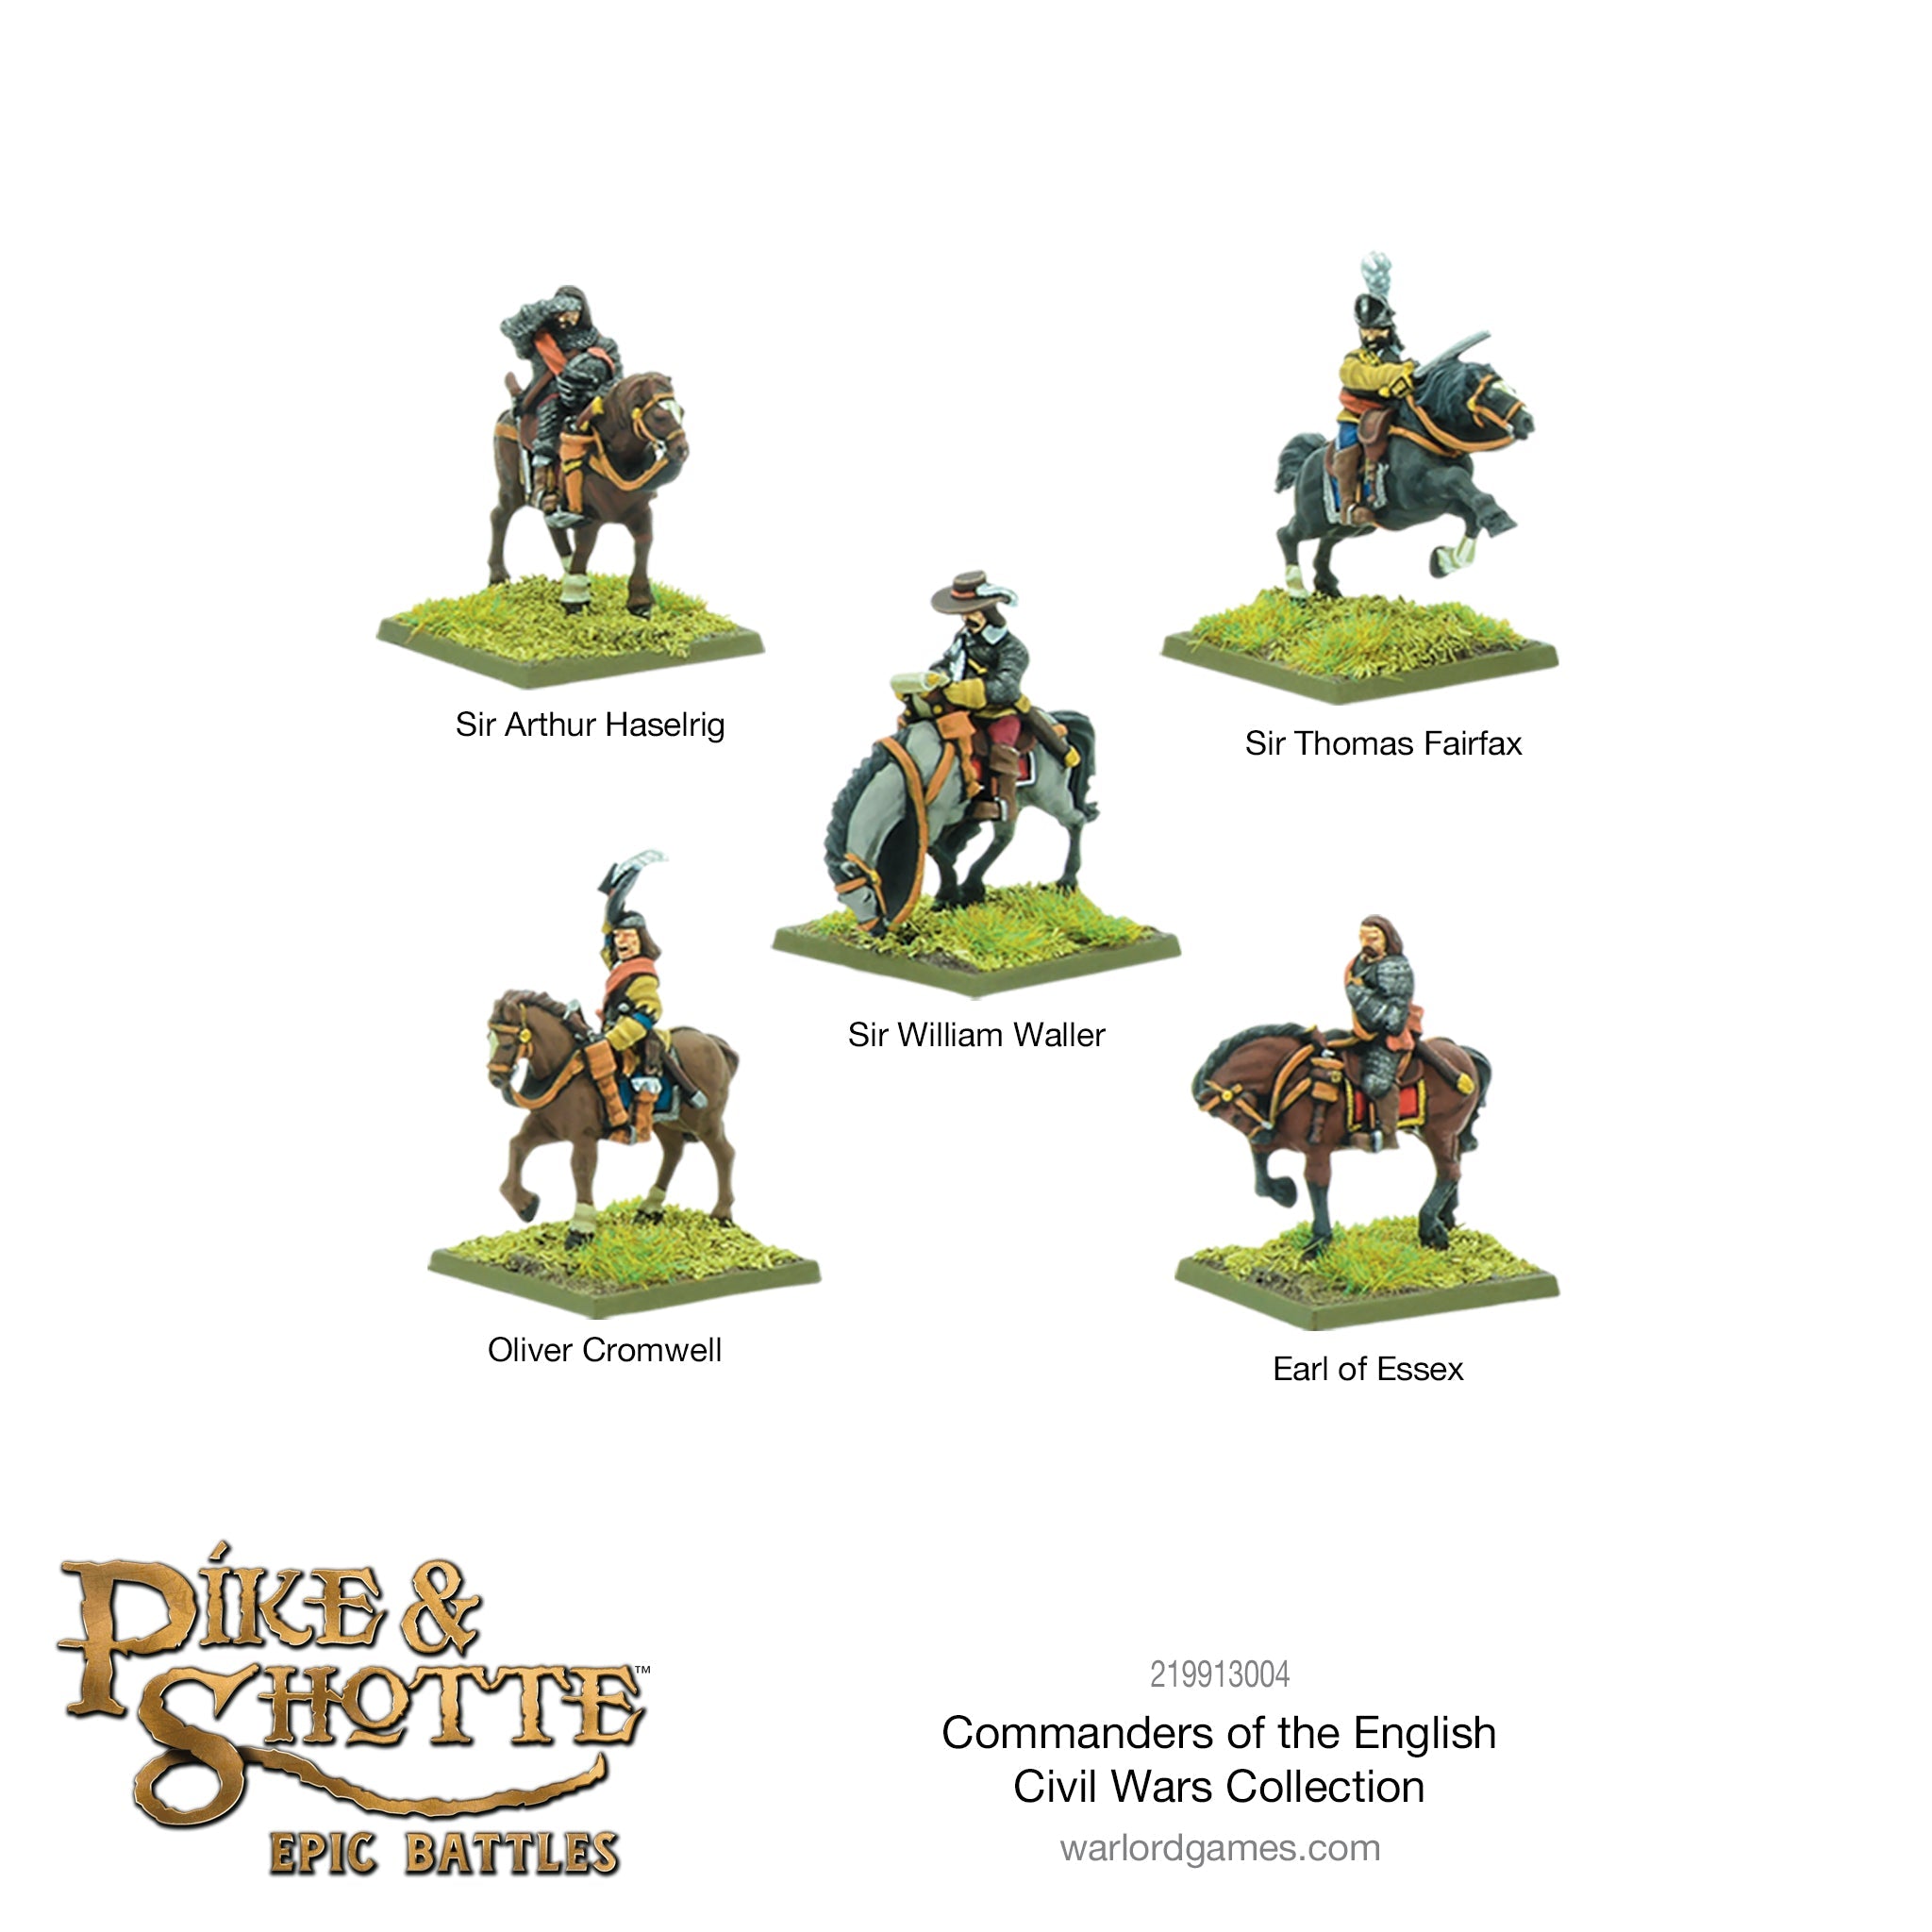 Pike & Shotte Epic Battles - Commanders of the English Civil Wars Collection